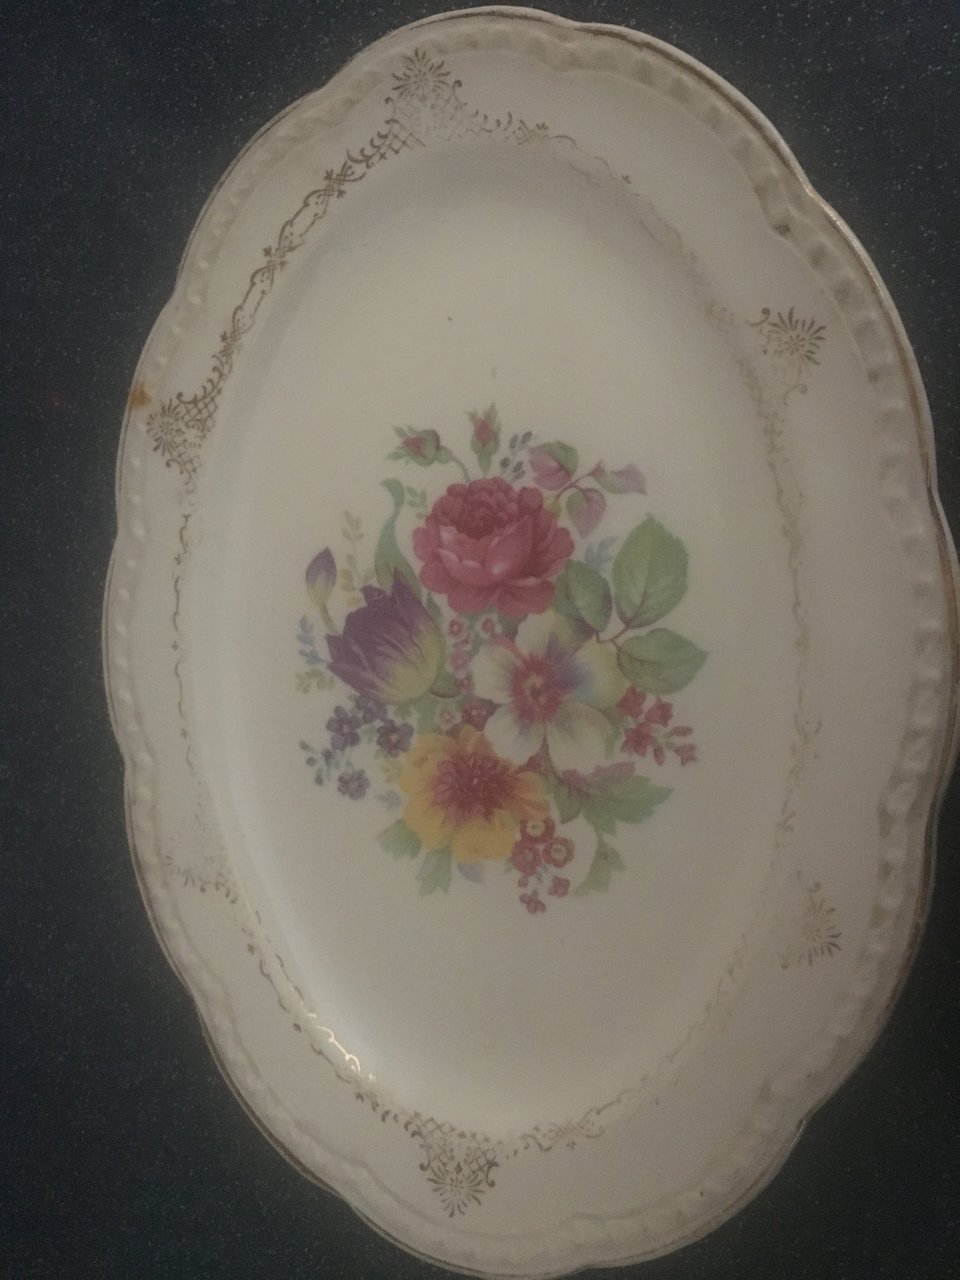 I Have A Royal 22kt Gold Dinnerware Plate Is It Worth Anythi... | My